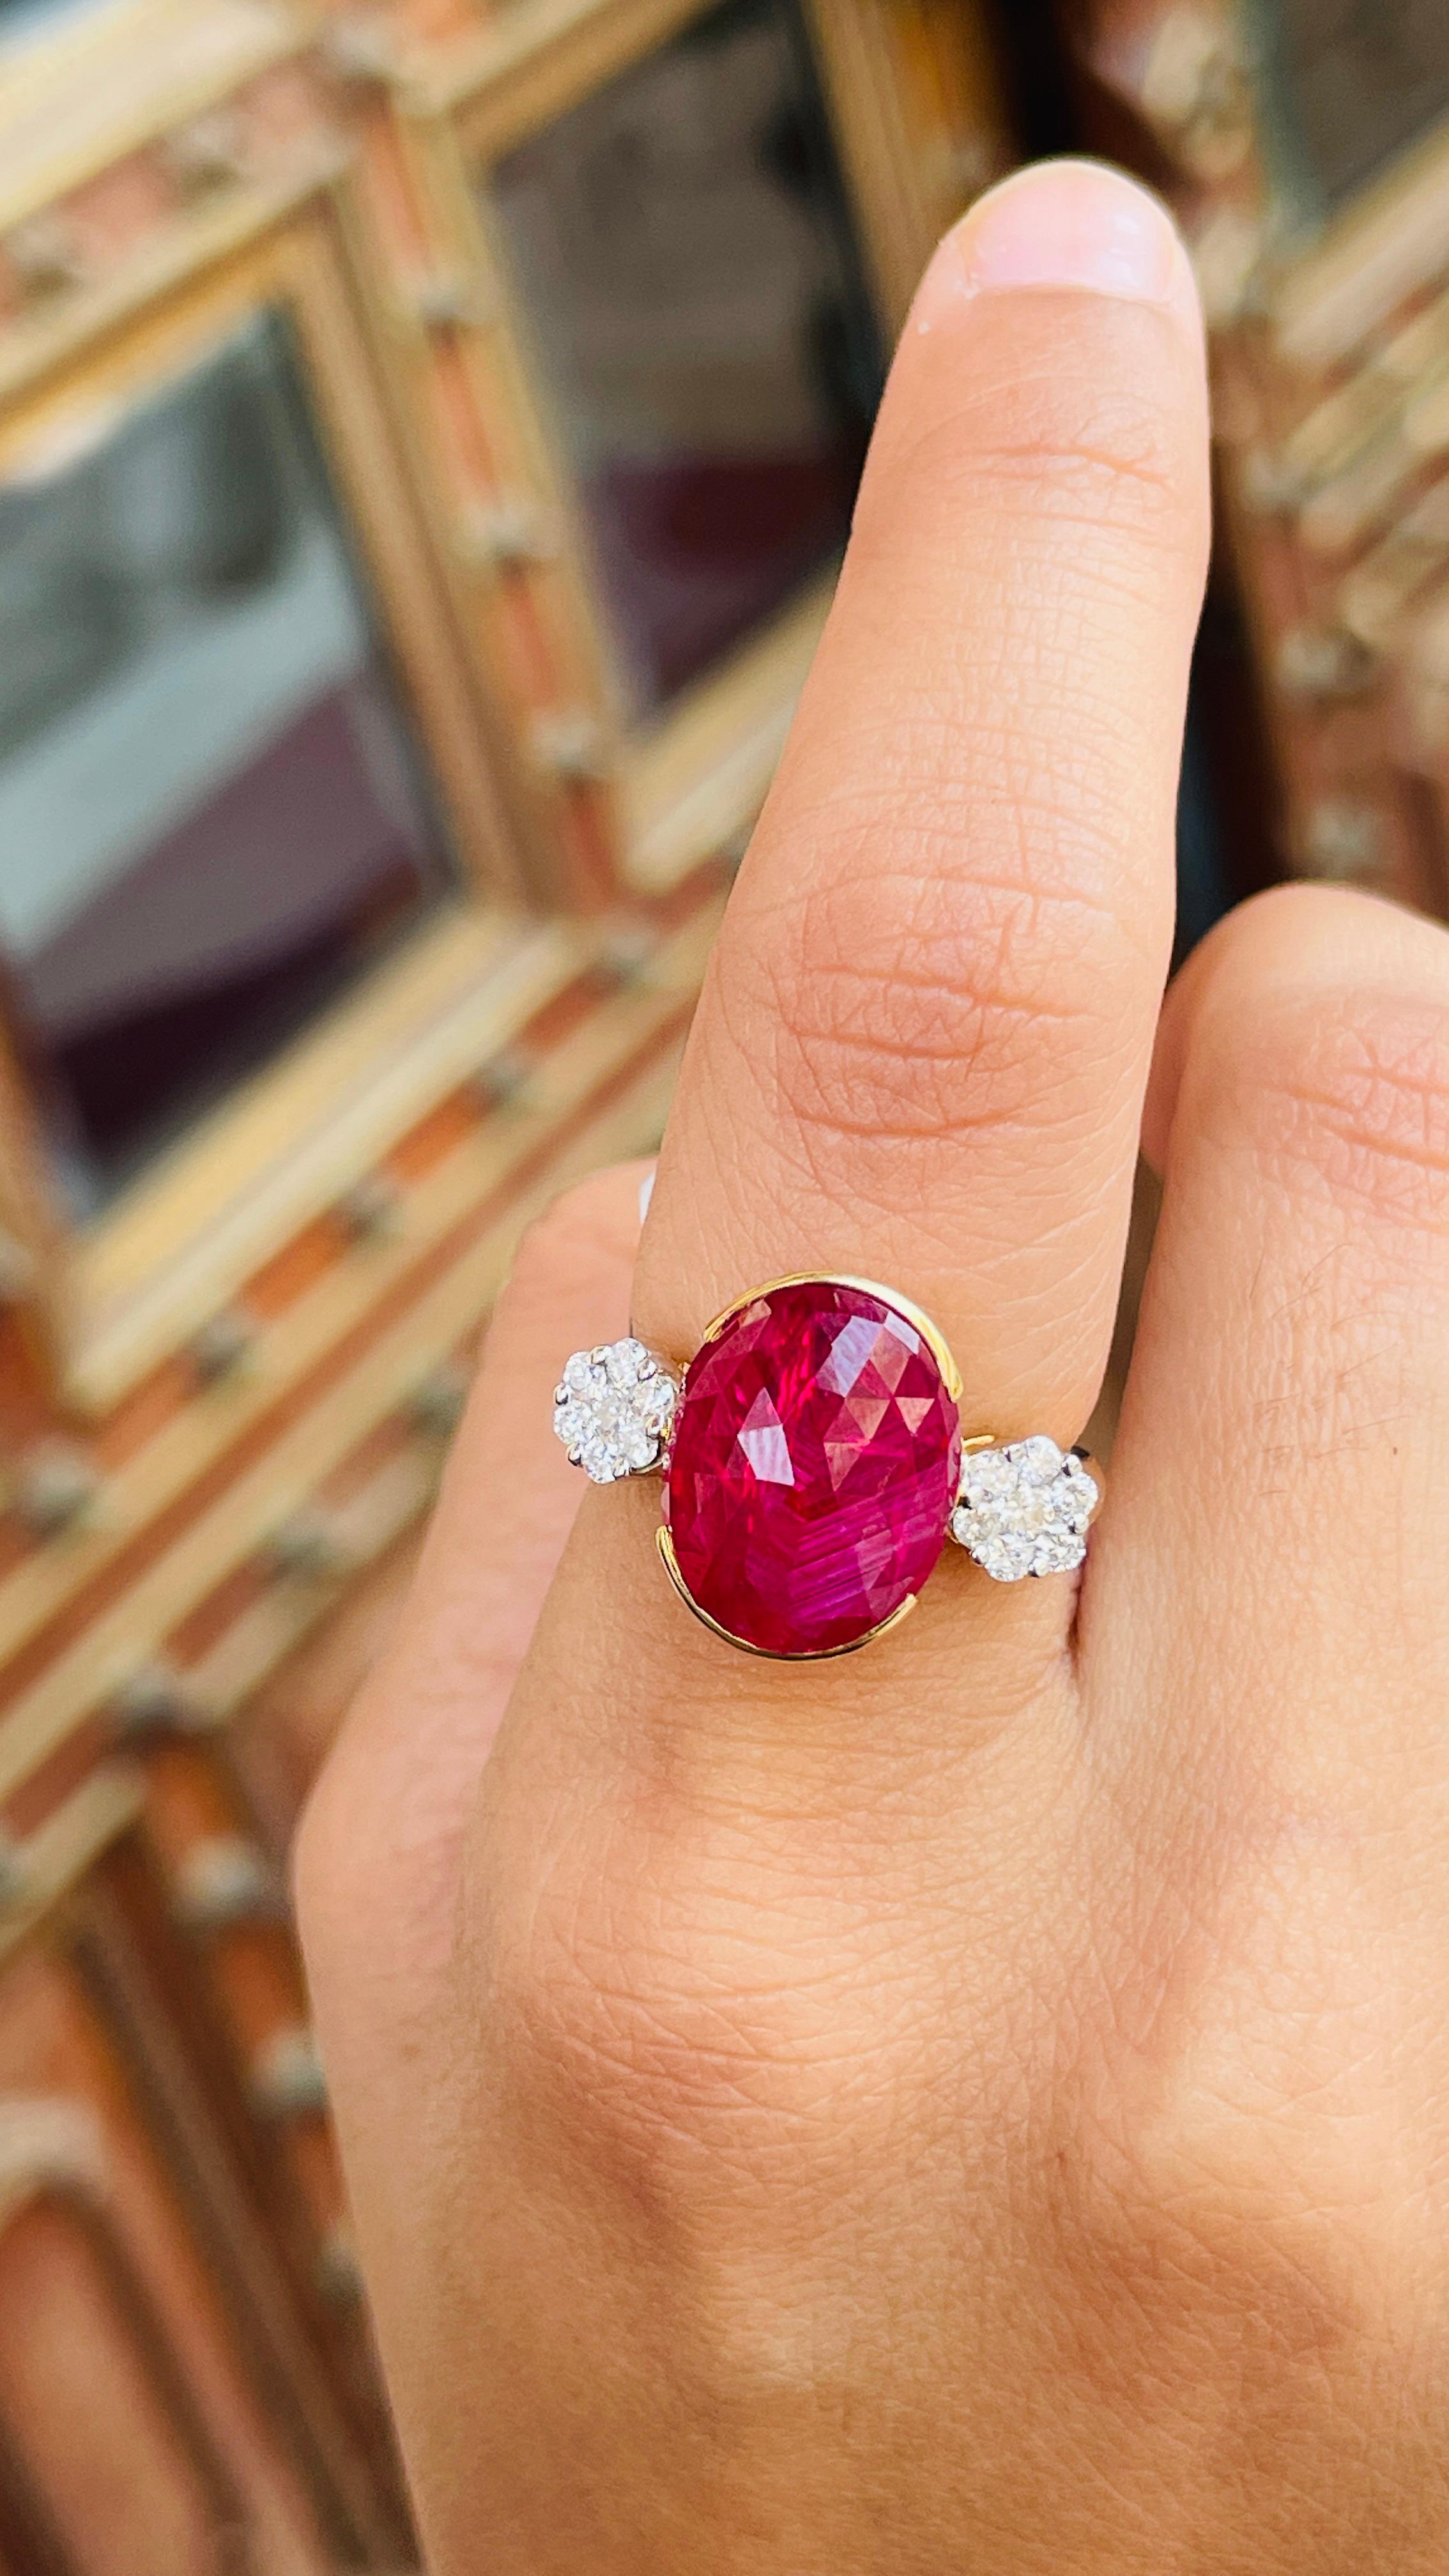 For Sale:  2.65 Carat Oval Cut Ruby Diamond Engagement Ring in 18 Karat Yellow Gold 3